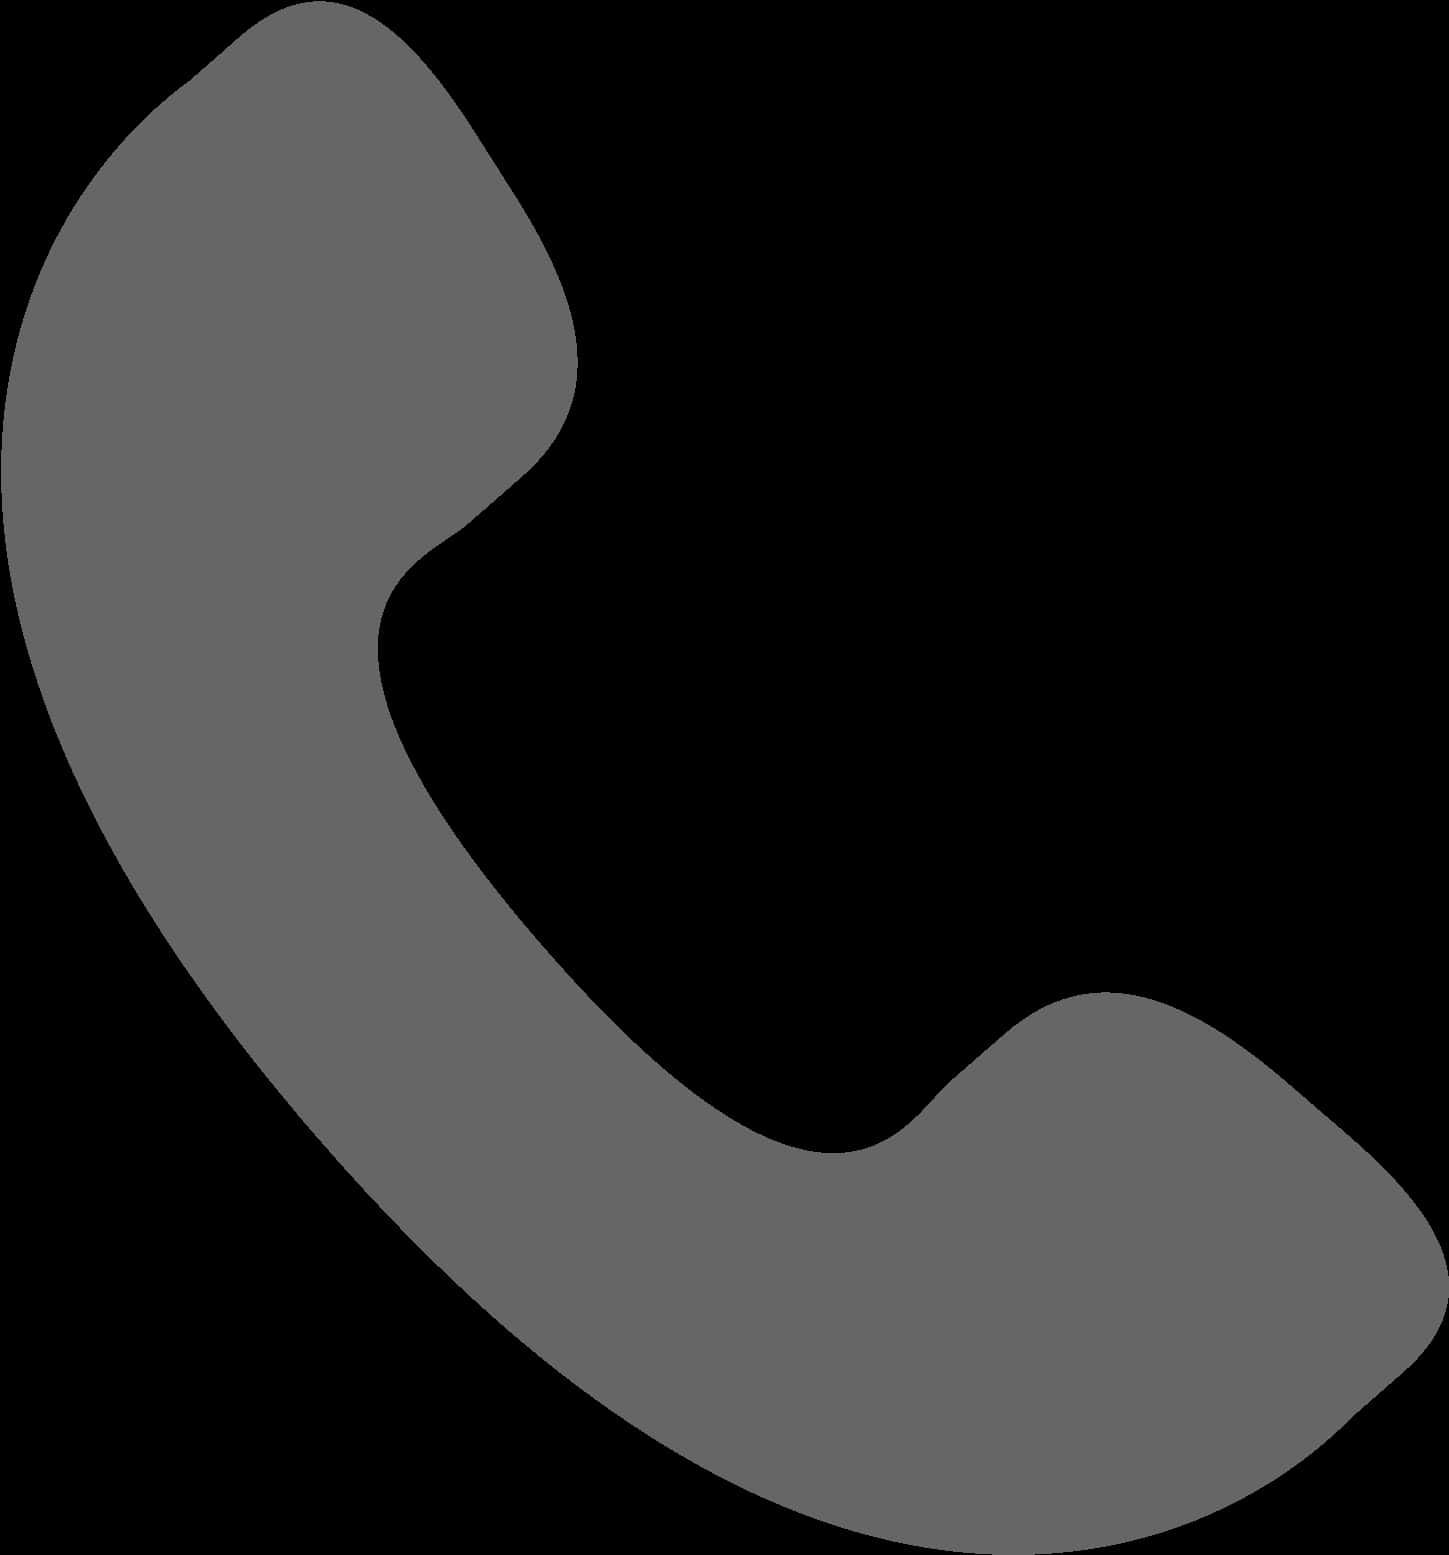 A Grey Telephone Receiver On A Black Background